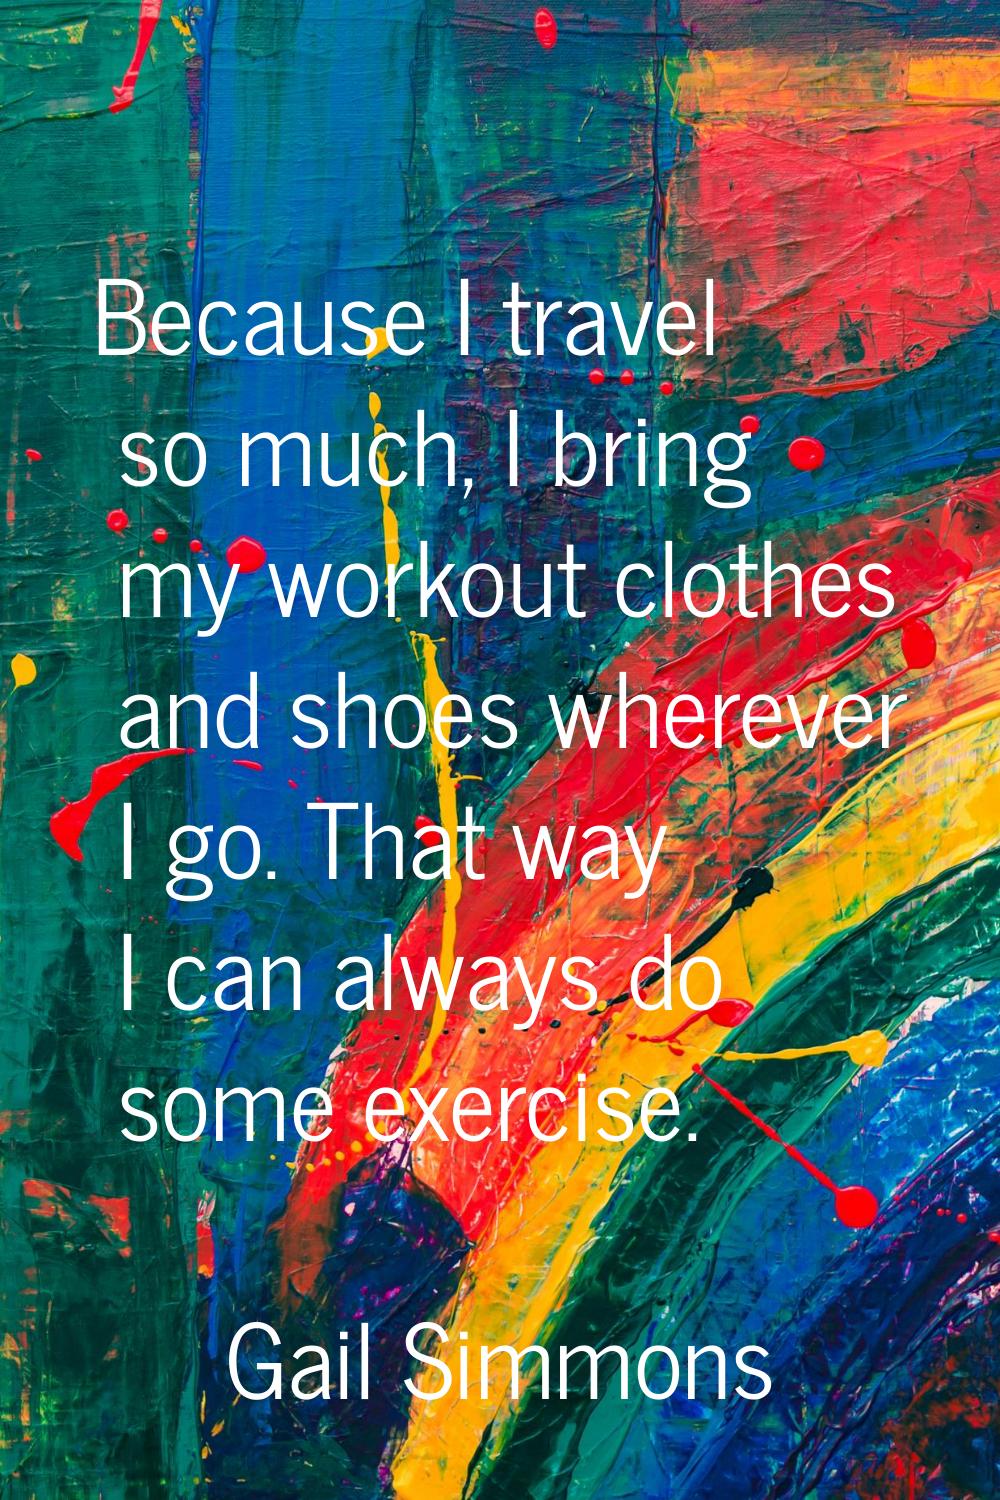 Because I travel so much, I bring my workout clothes and shoes wherever I go. That way I can always